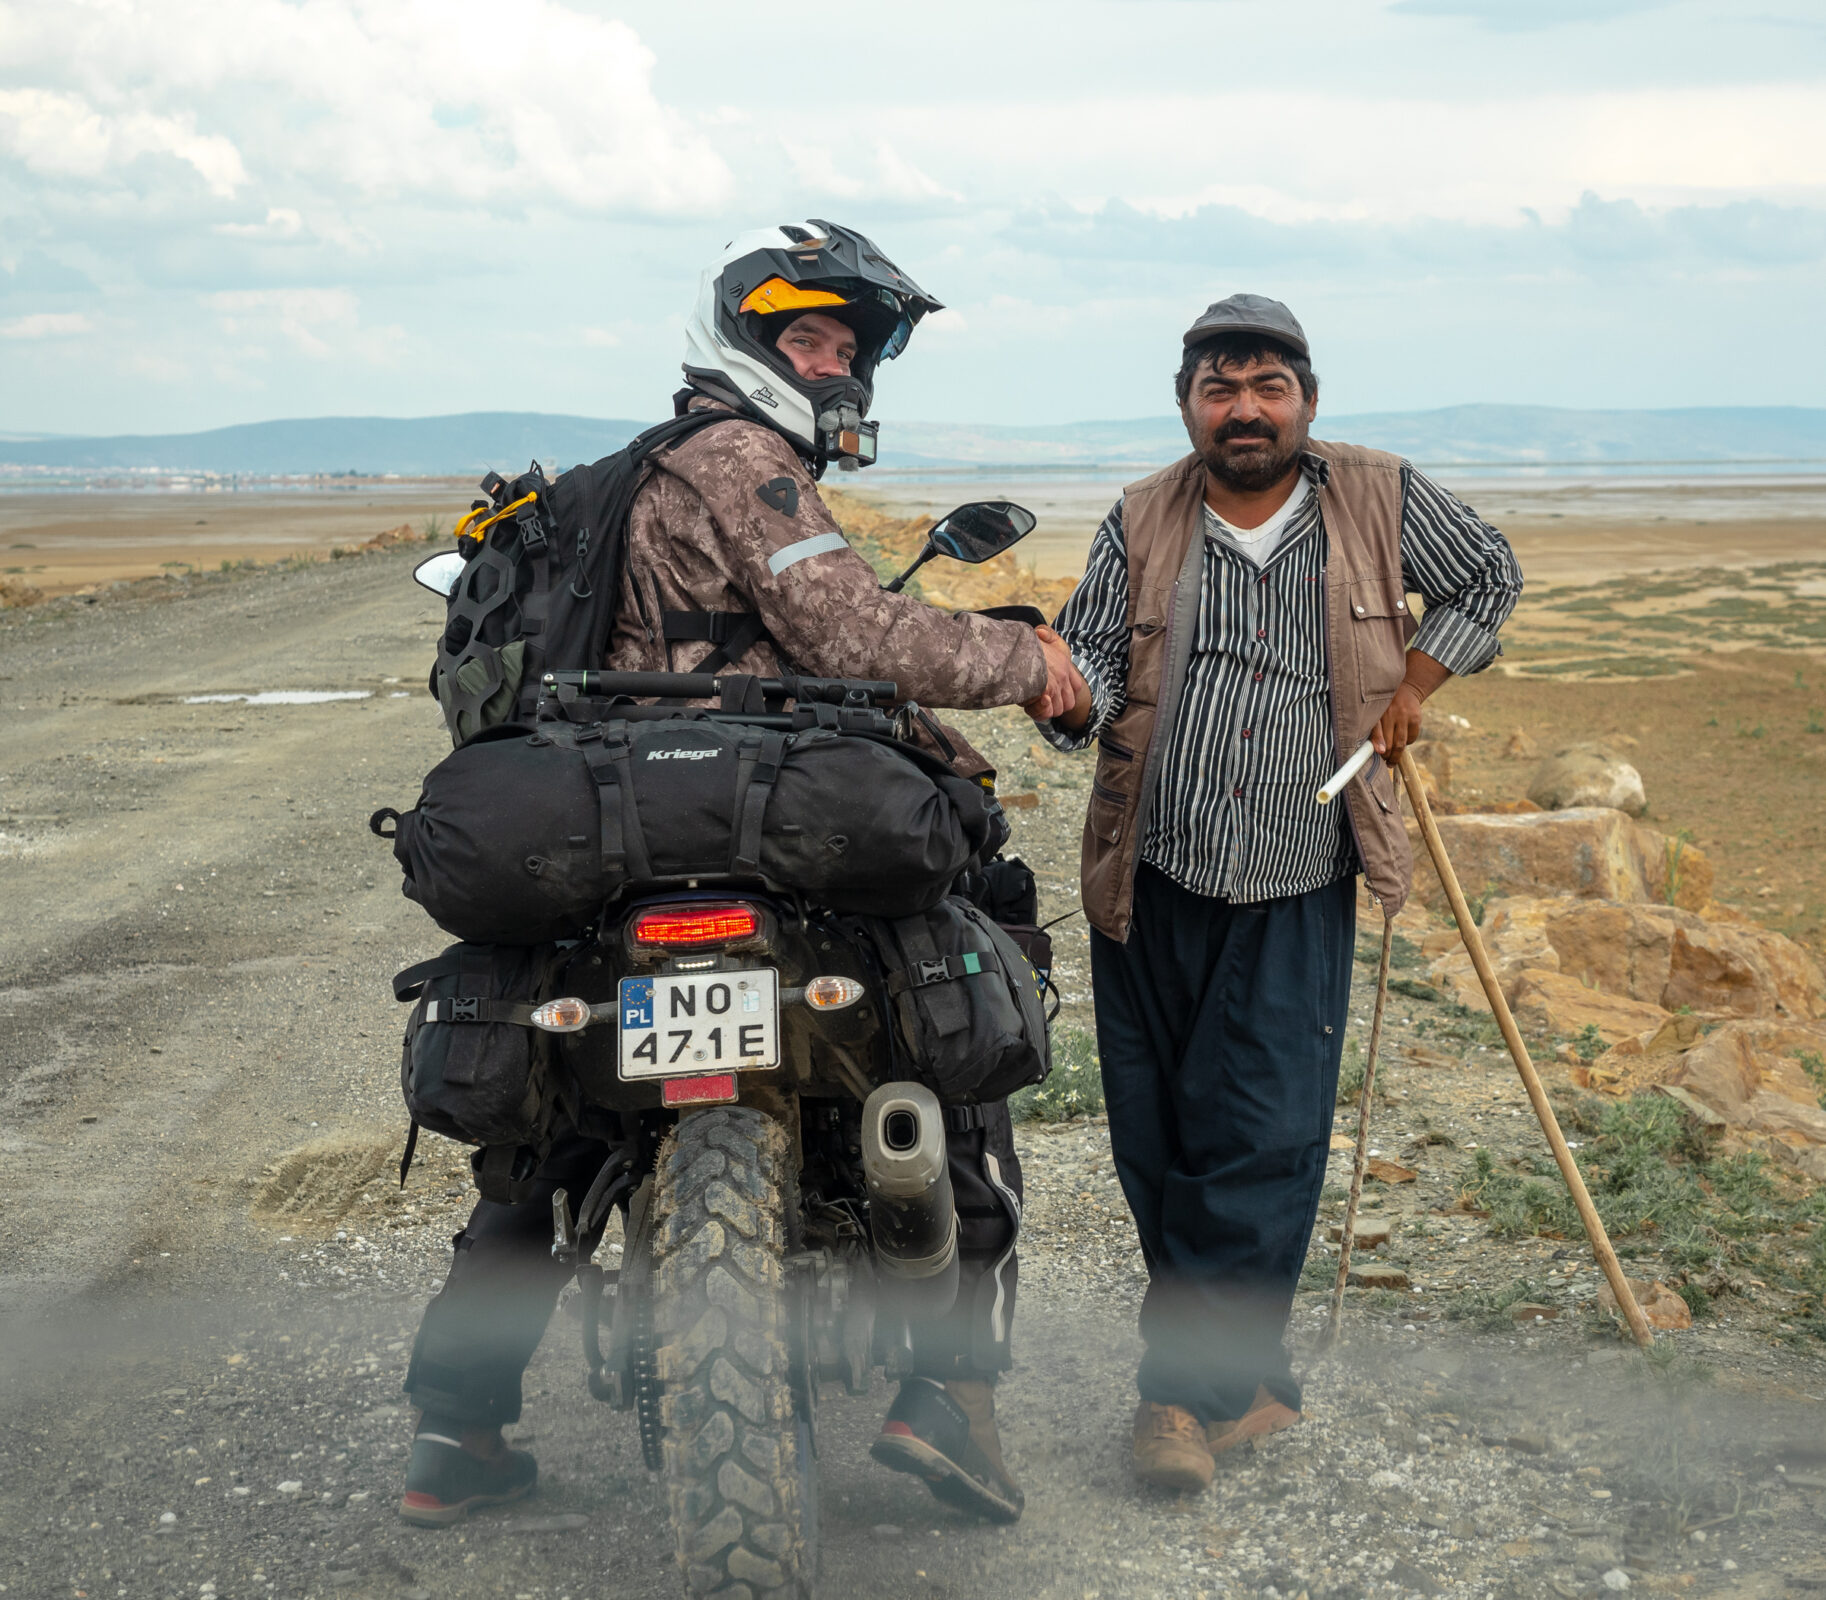 Off road motorcycle trip to Turkey